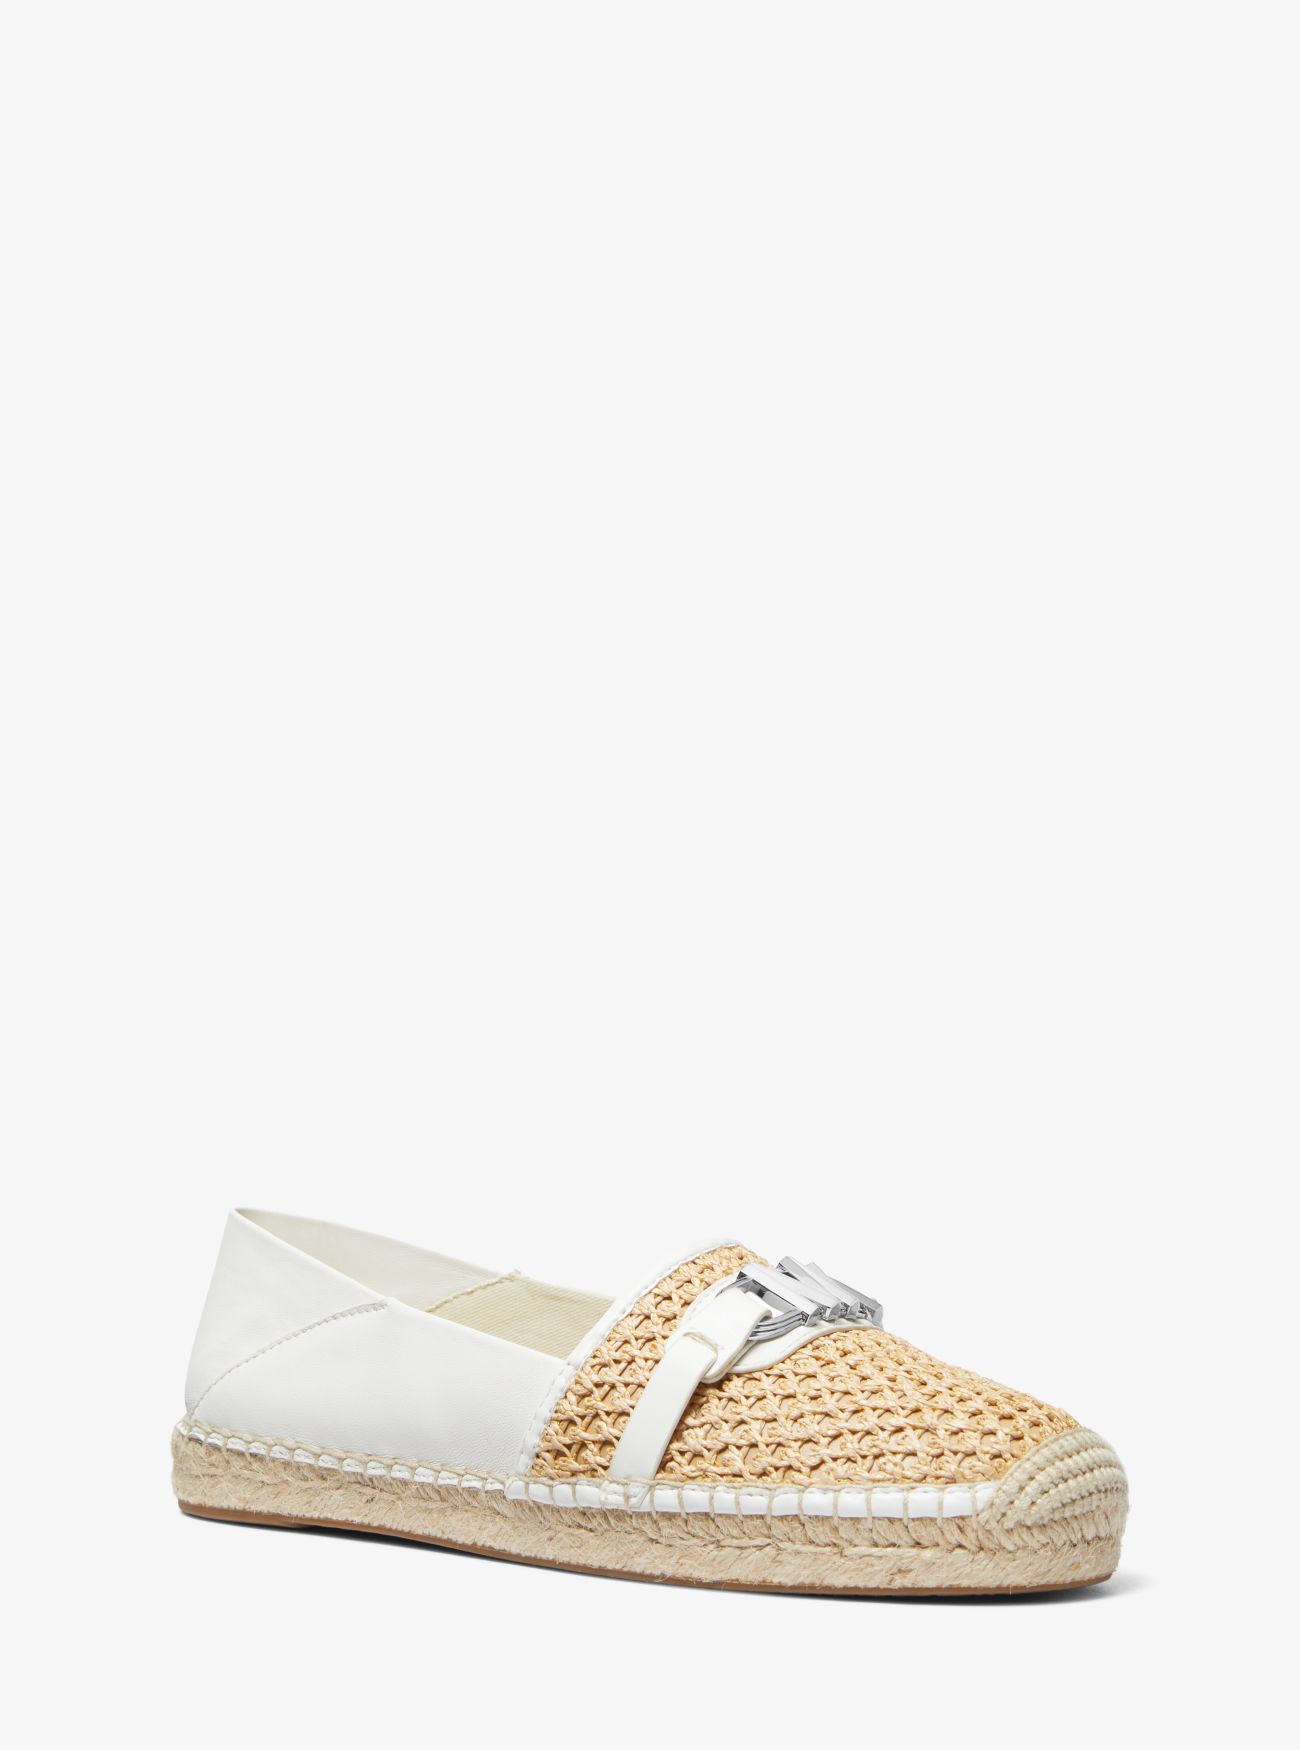 MK Ember Leather and Straw Espadrille - Natural - Michael Kors